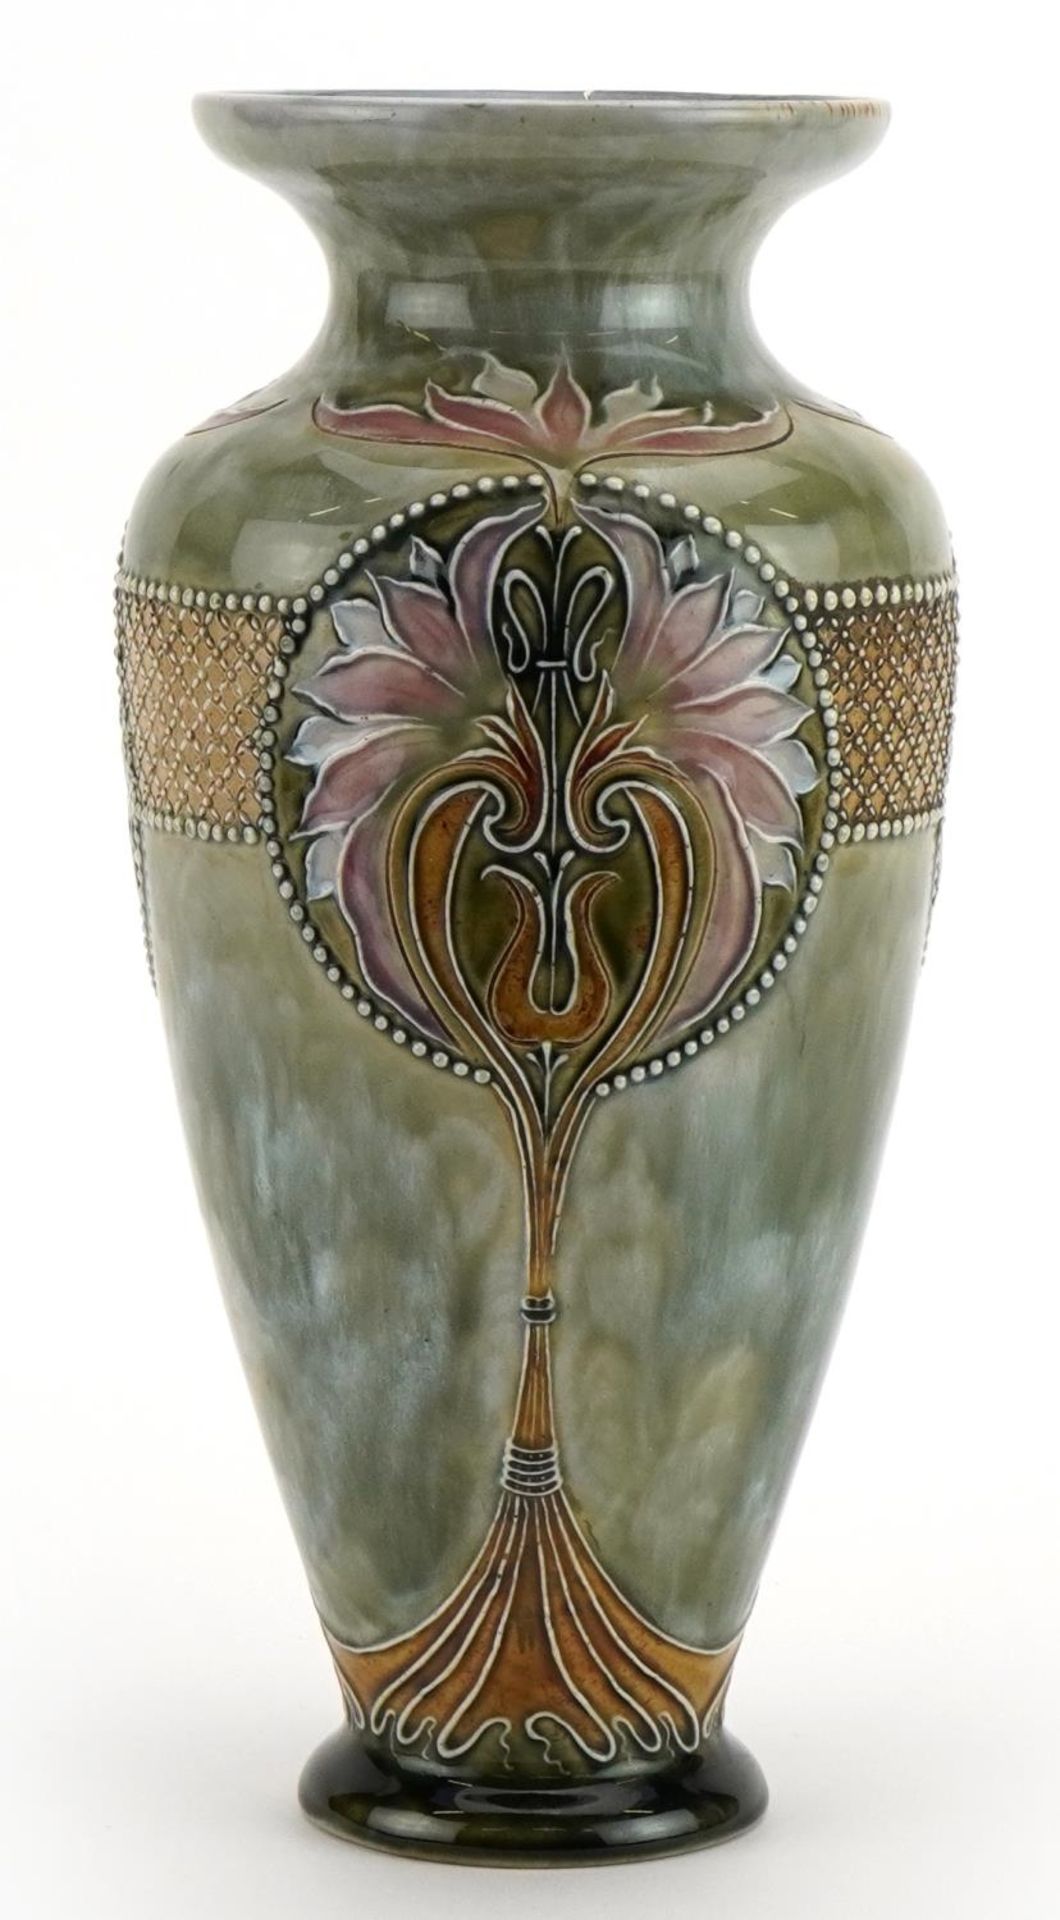 Eliza Simmons for Royal Doulton, Art Nouveau stoneware vase hand painted and incised with stylised